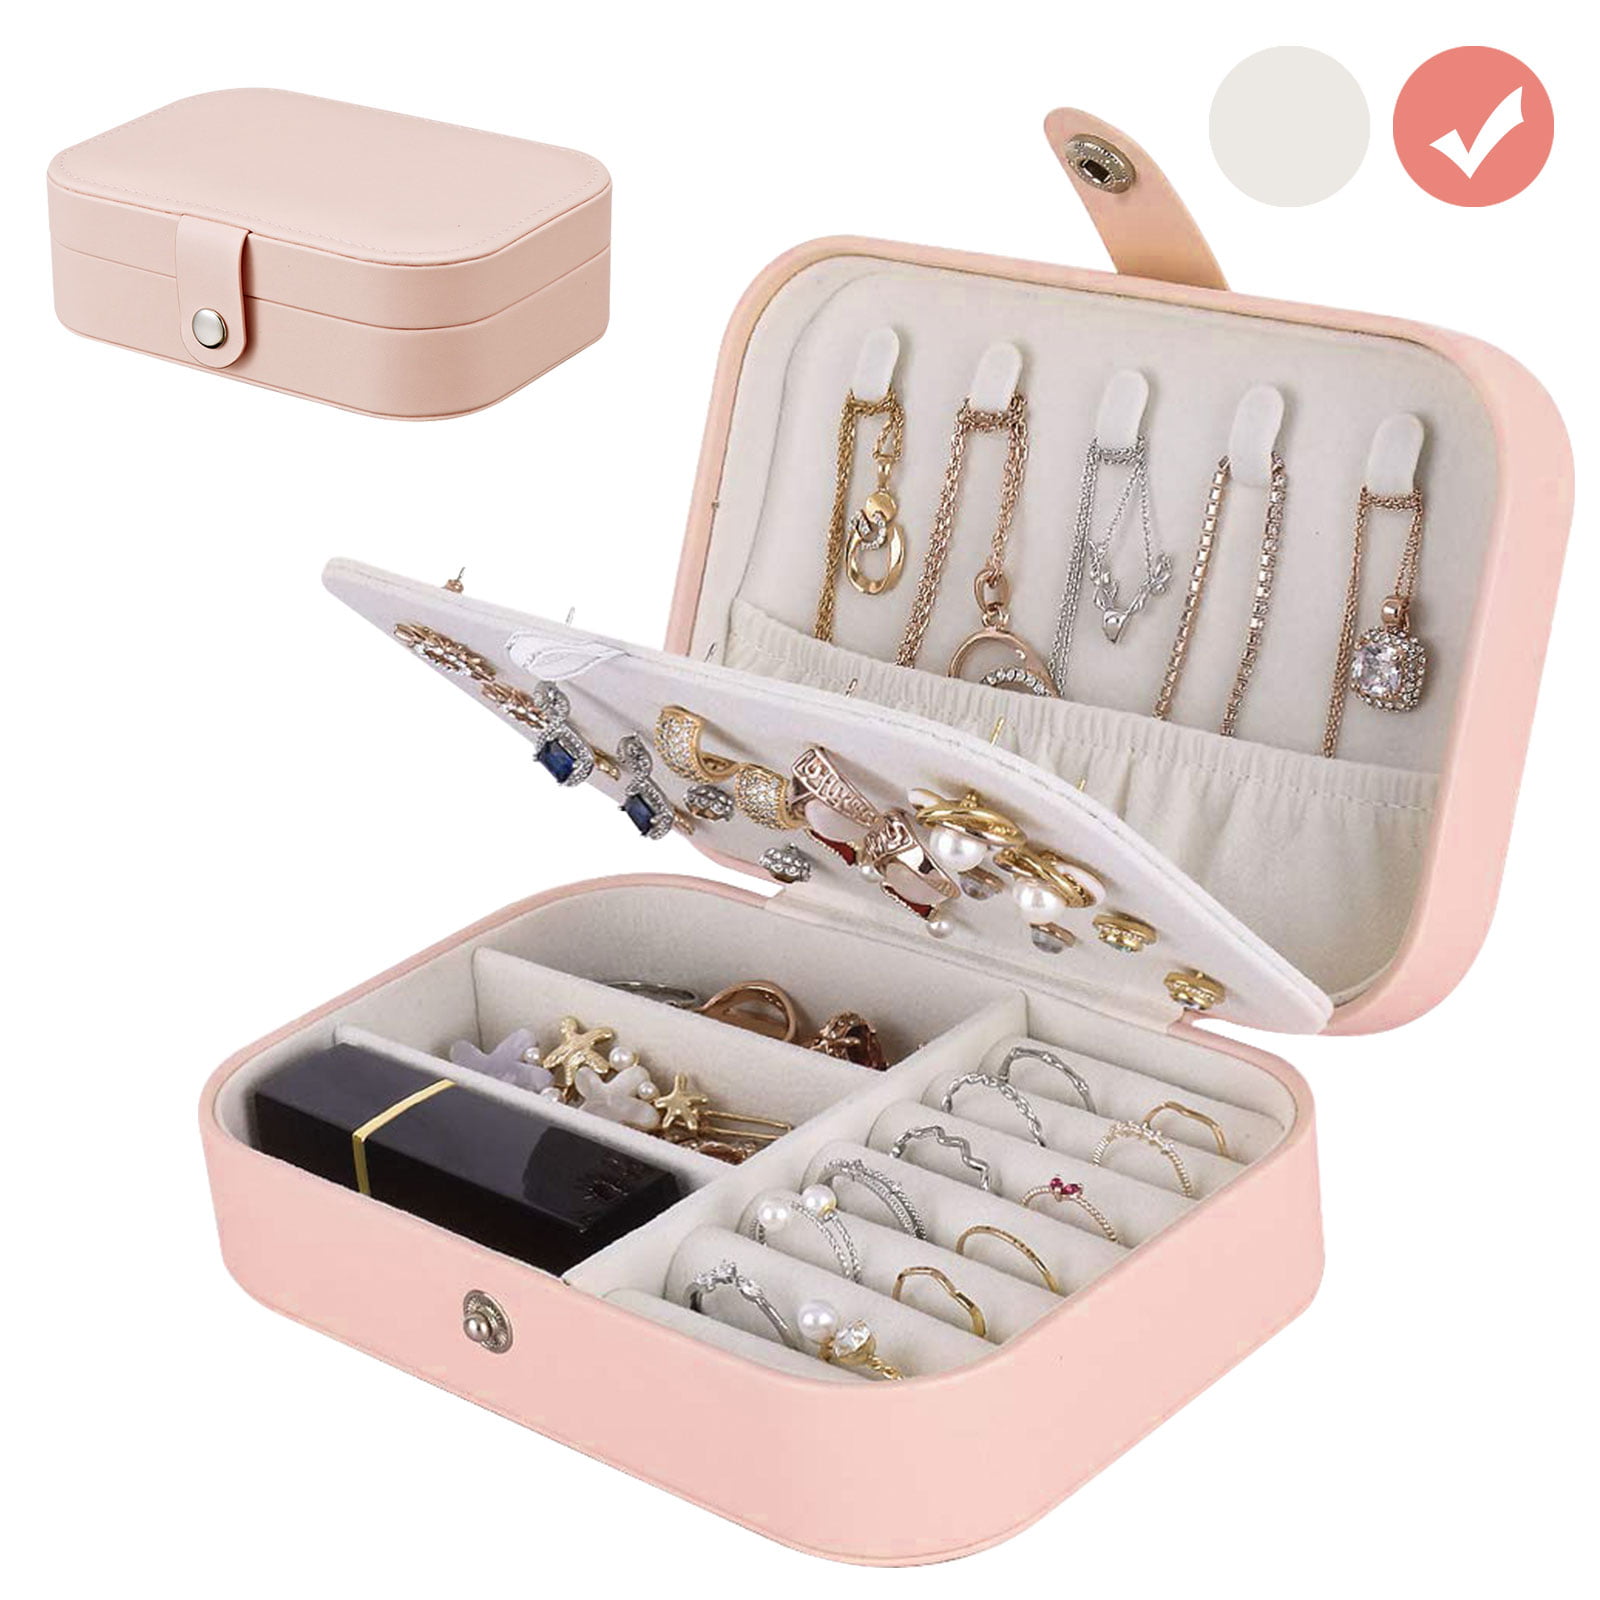 TSV Jewelry Box for Women, Double Layer Soft Travel Jewelry Organizer,  Adjustable Portable Jewelry Display Box Storage Case for Necklace Earring  